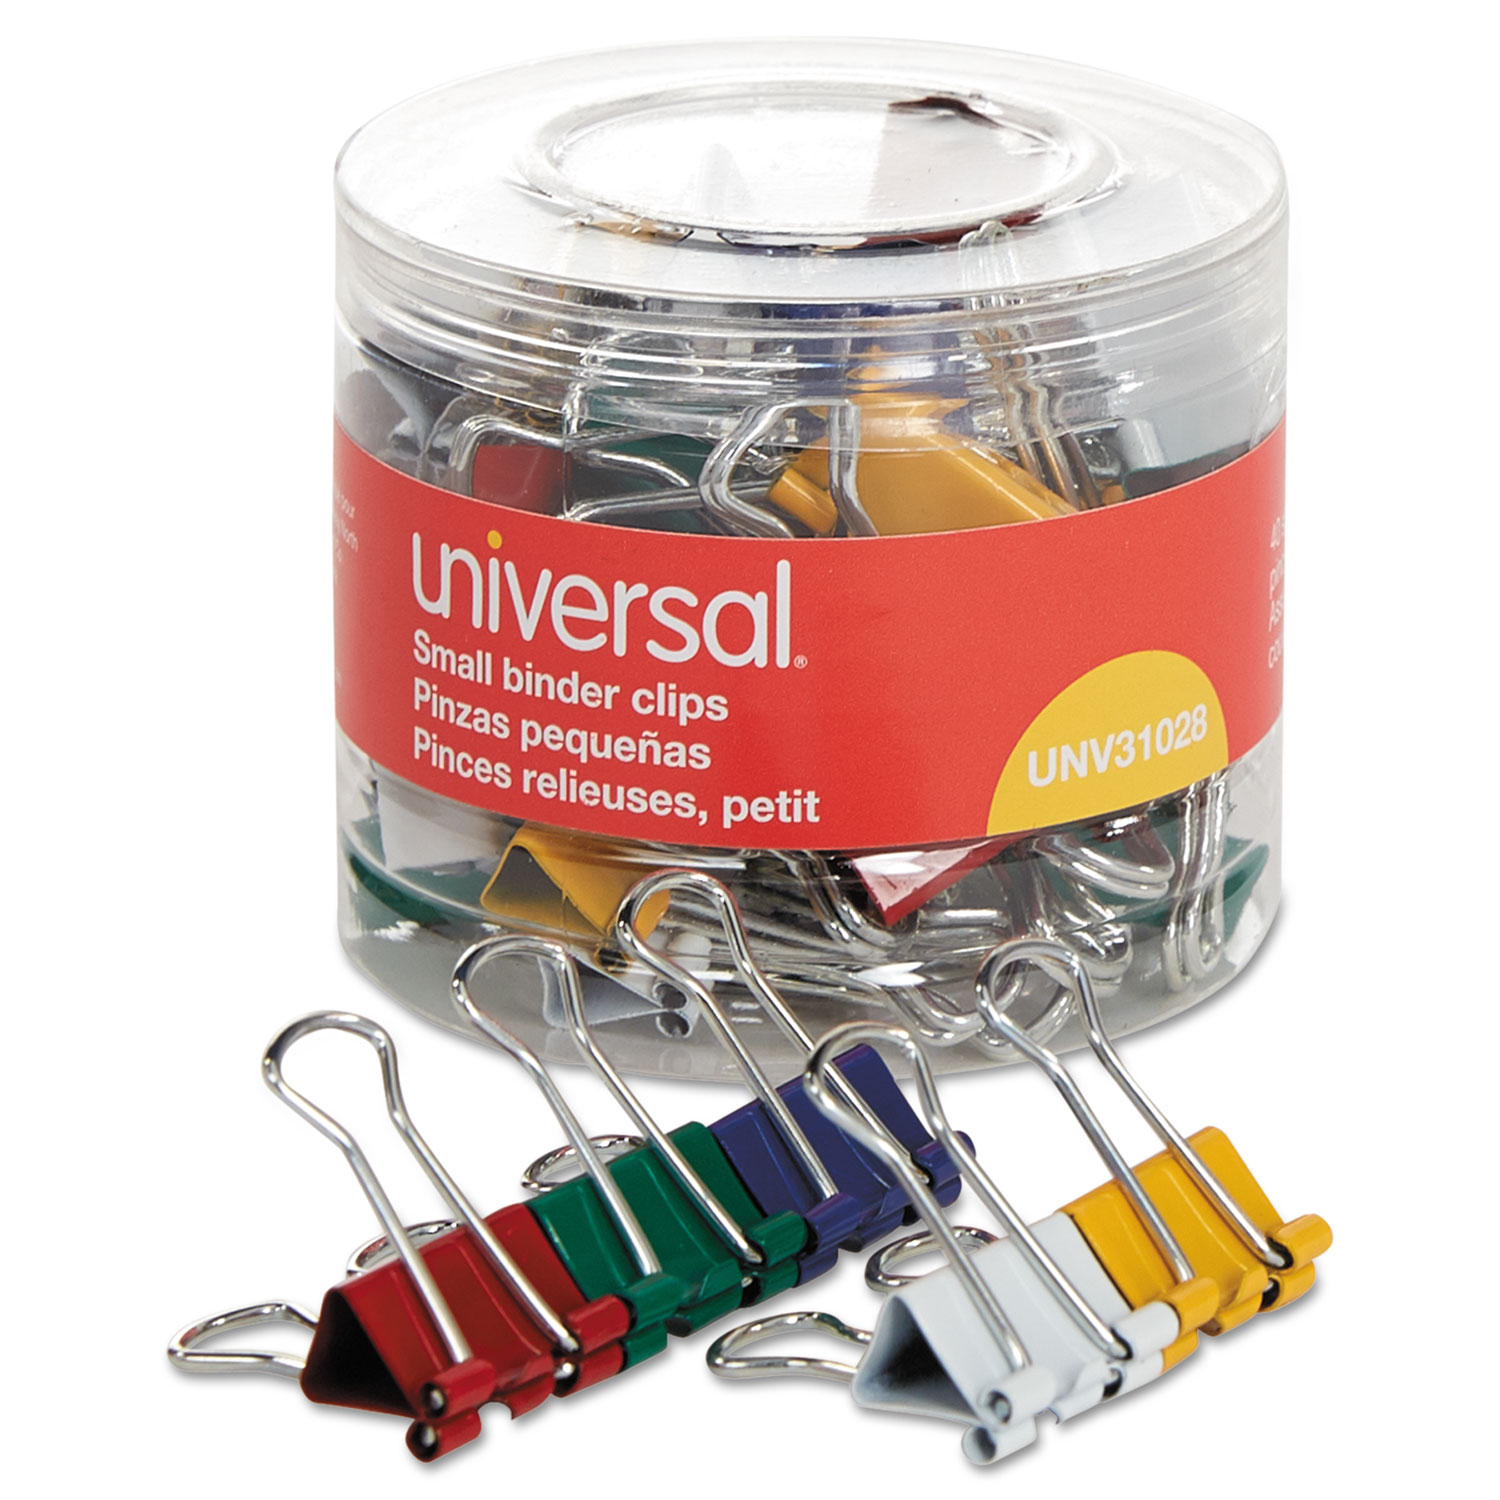  Universal UNV31028 Binder Clips in Dispenser Tub, Small, Assorted Colors, 40/Pack (UNV31028) 